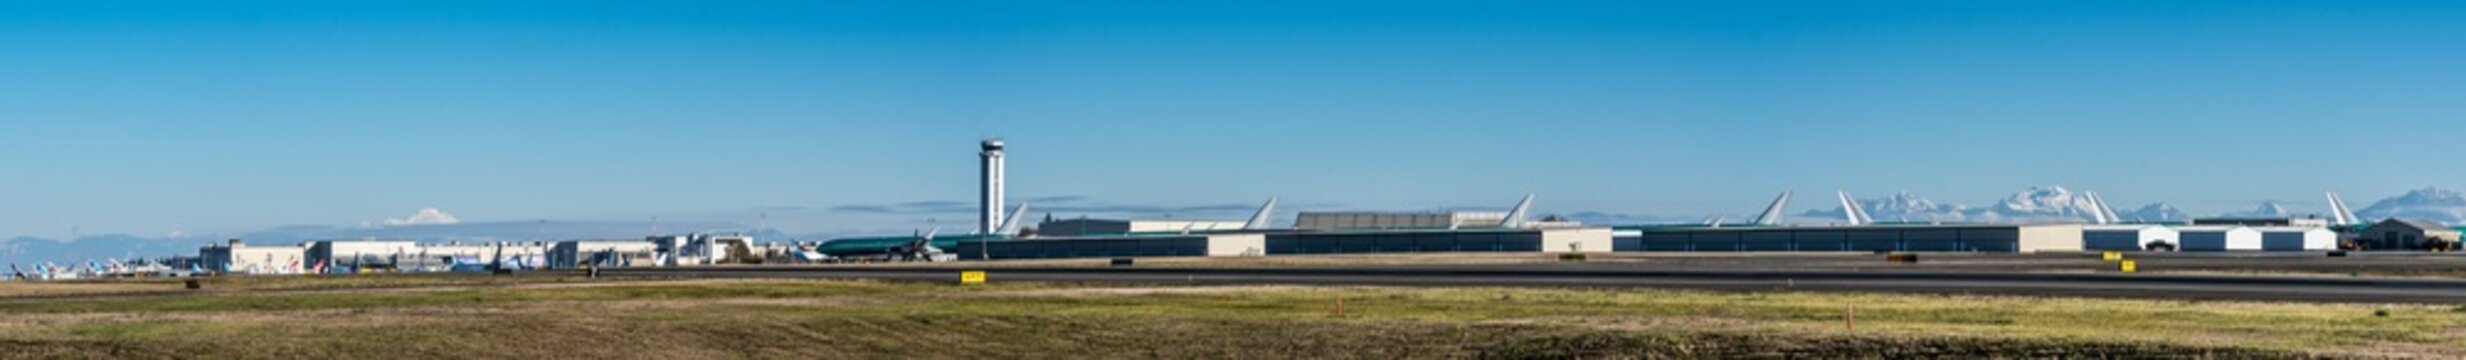 Everett, Washington, USA - November 2022, Paine Field runway, hangar and Tower environment with Boeing assembly line and parked Boeing Aircrafts around the Buildings - panoramic view